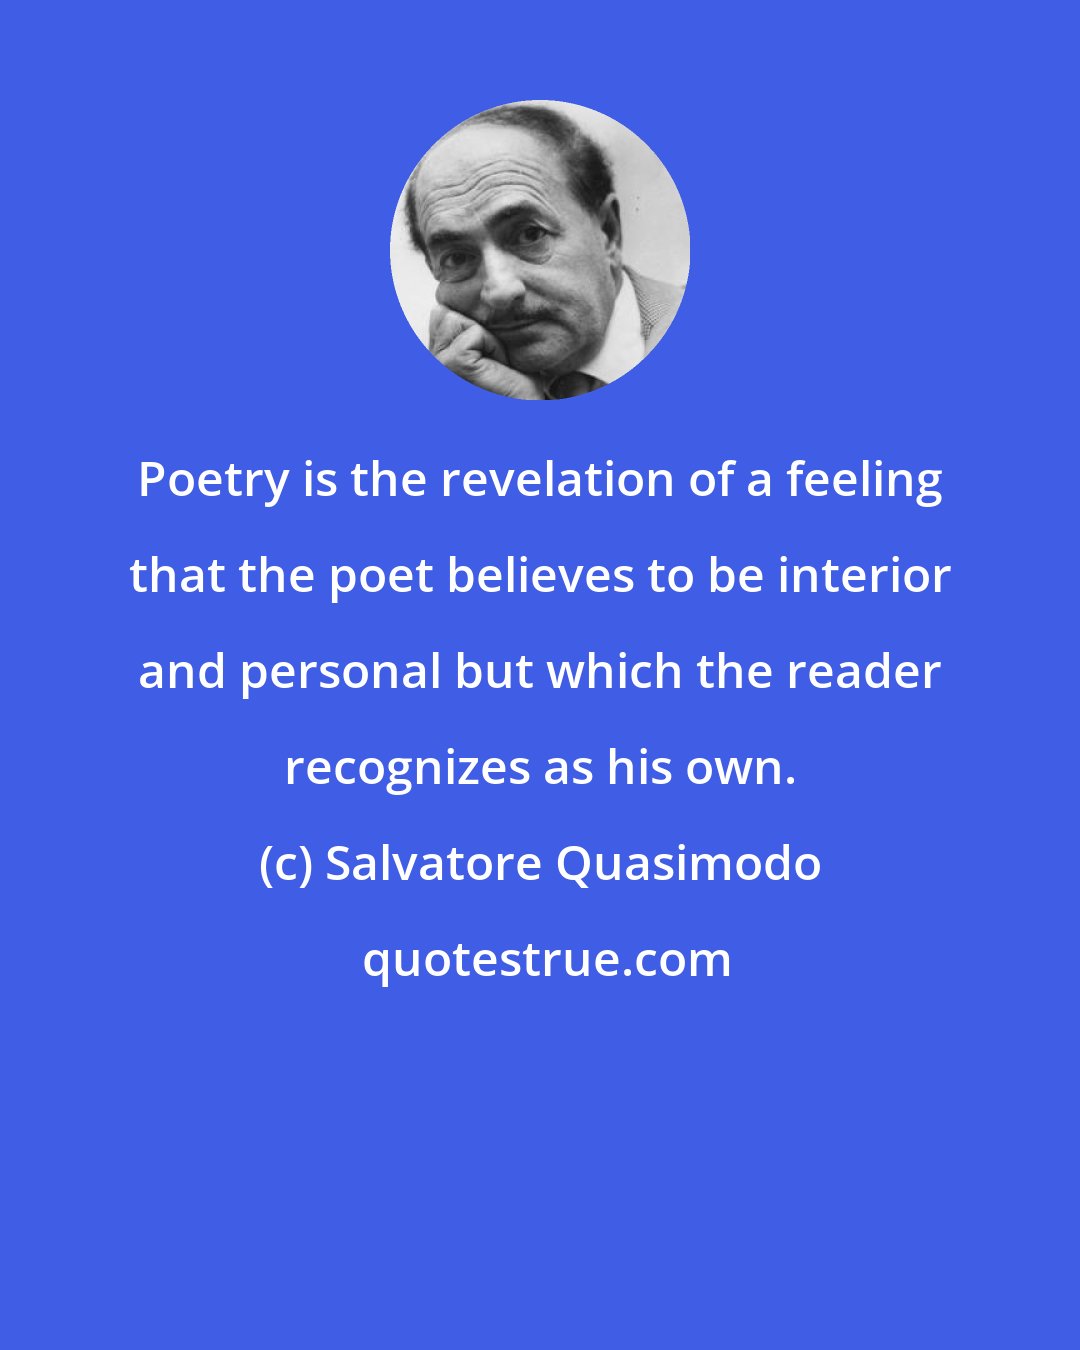 Salvatore Quasimodo: Poetry is the revelation of a feeling that the poet believes to be interior and personal but which the reader recognizes as his own.